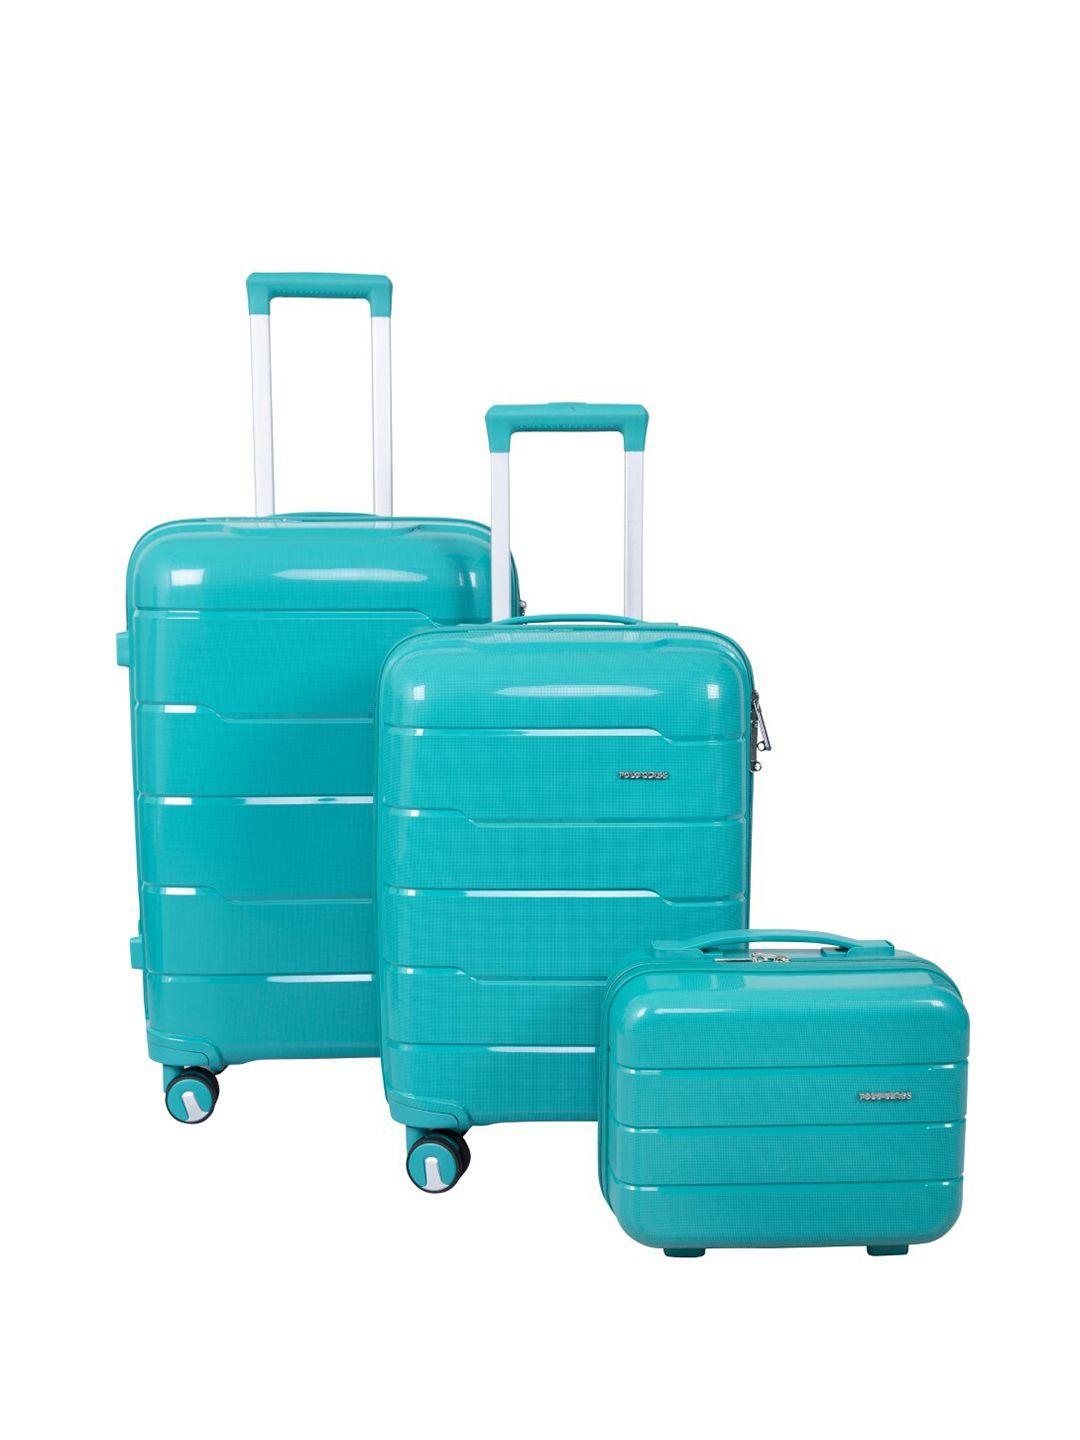 polo class  2-pcs hard-sided trolley suitcases & 1 vanity bags